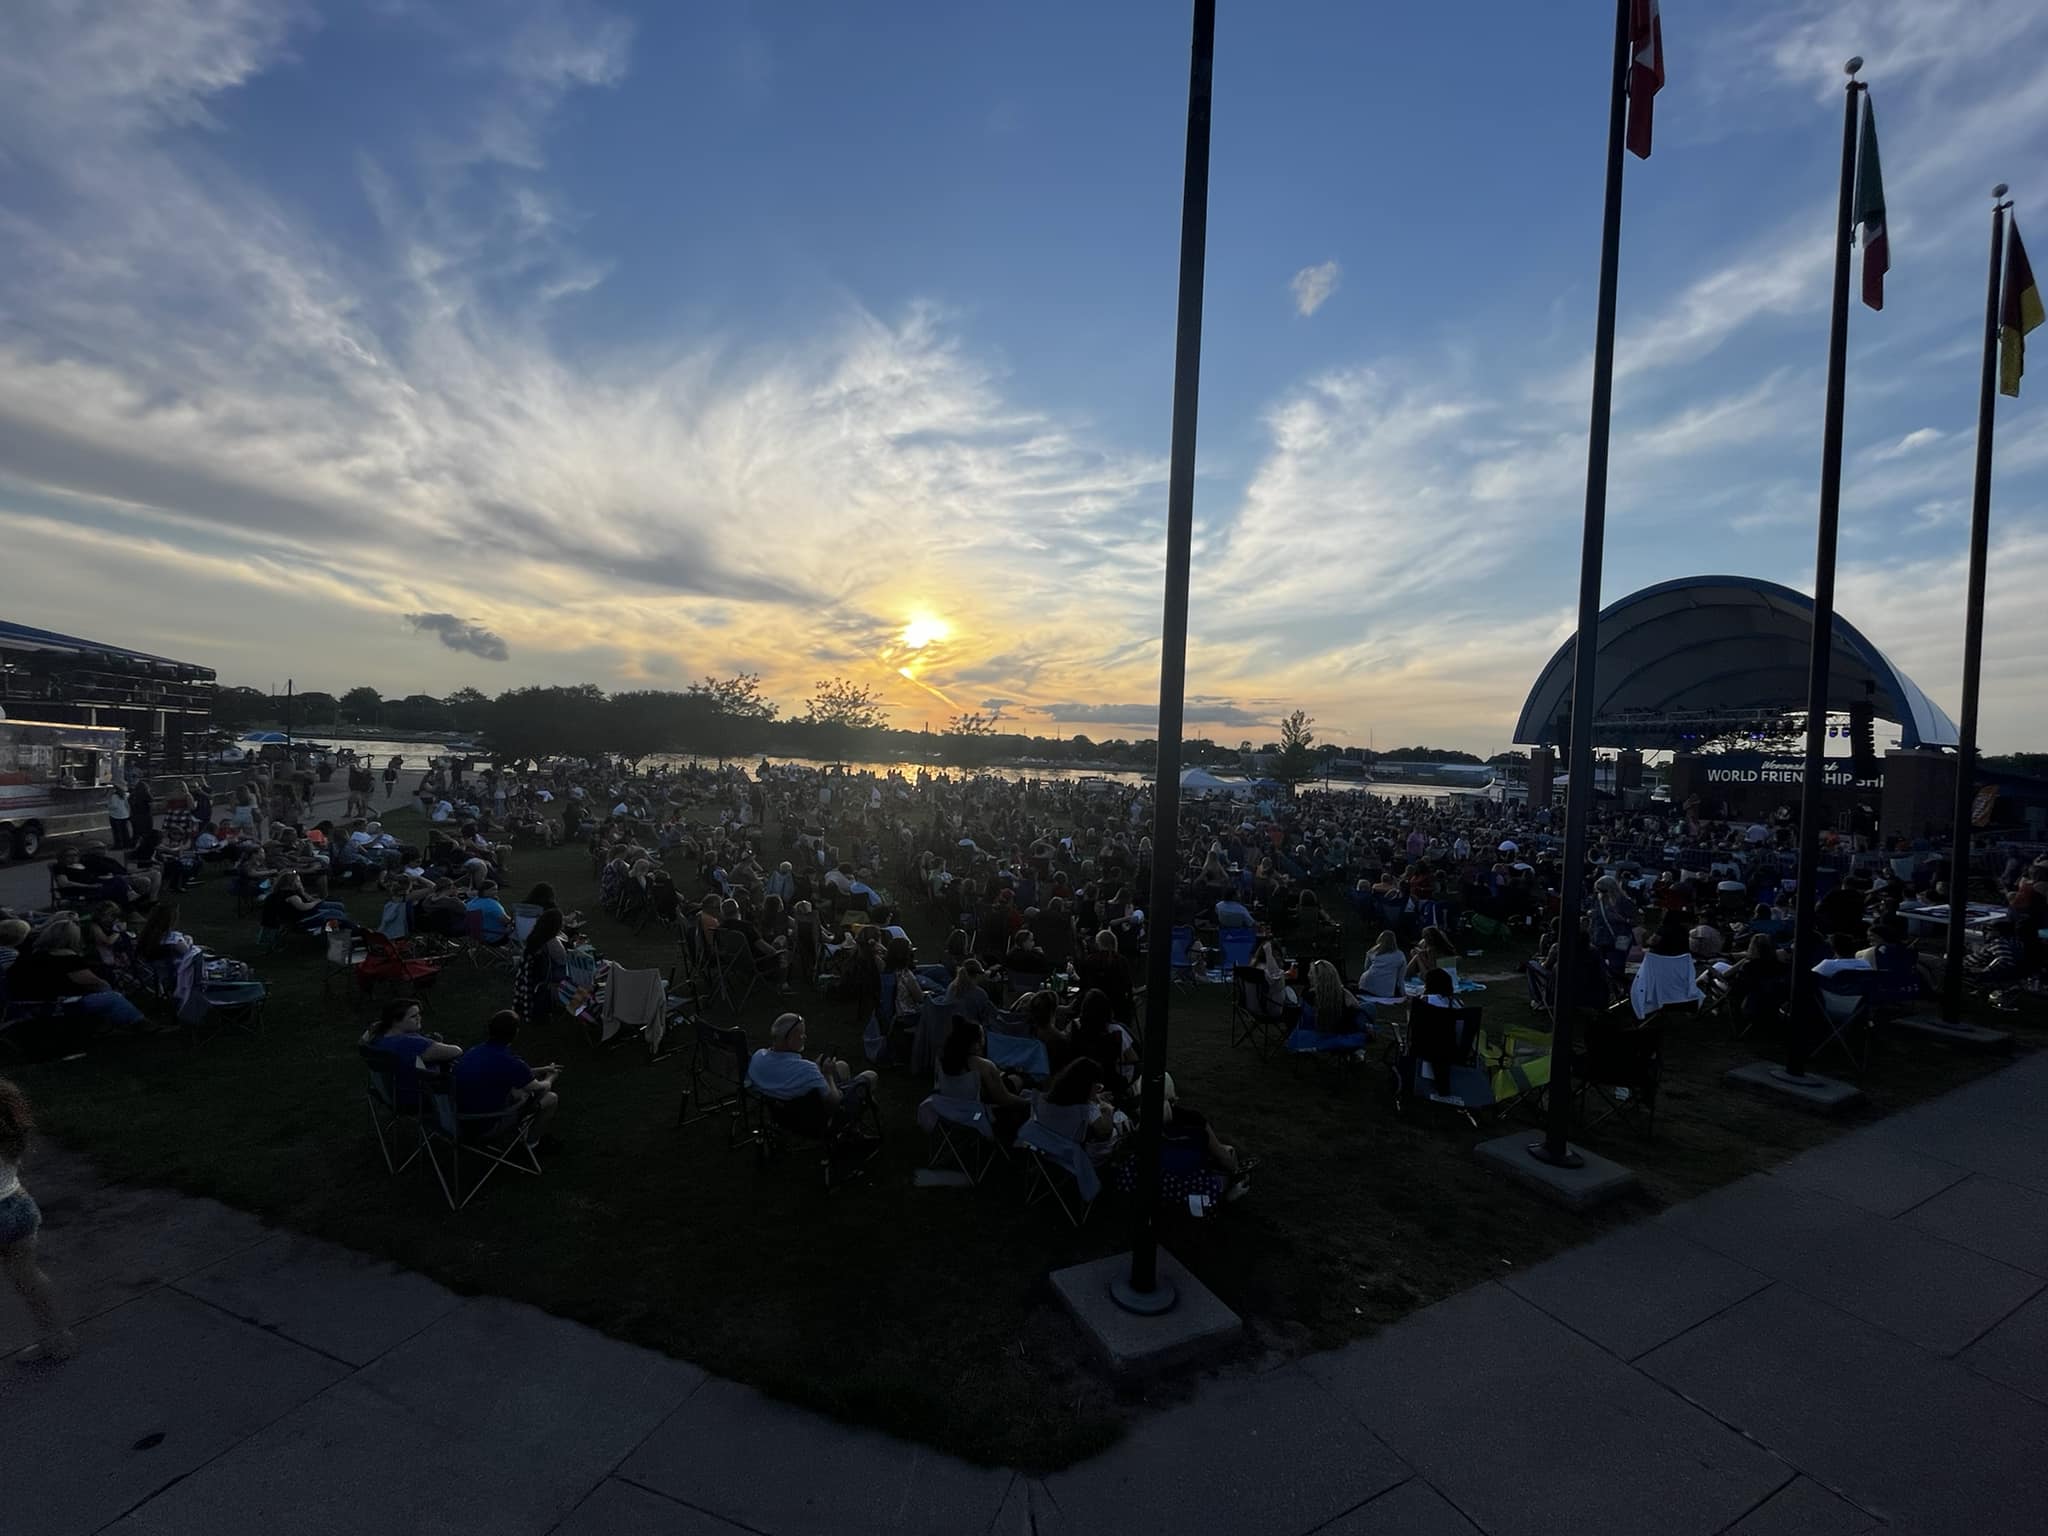 A beautiful night for a concert!